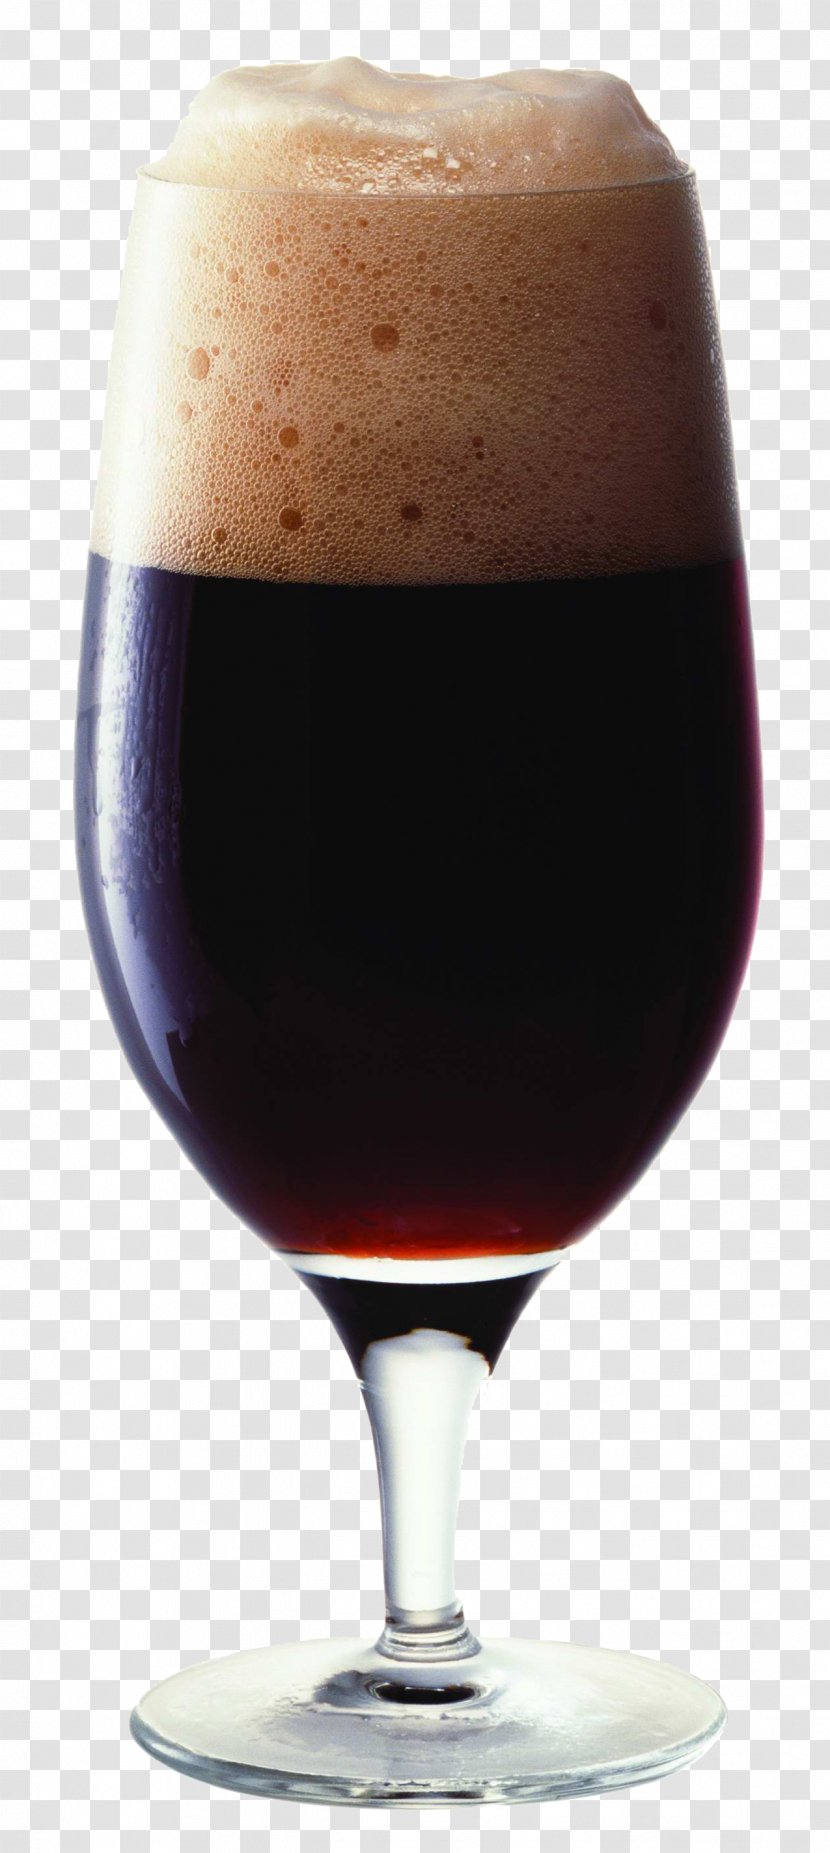 Beer Stout Wine Drink - Alcoholic Beverage - Food Photography Transparent PNG